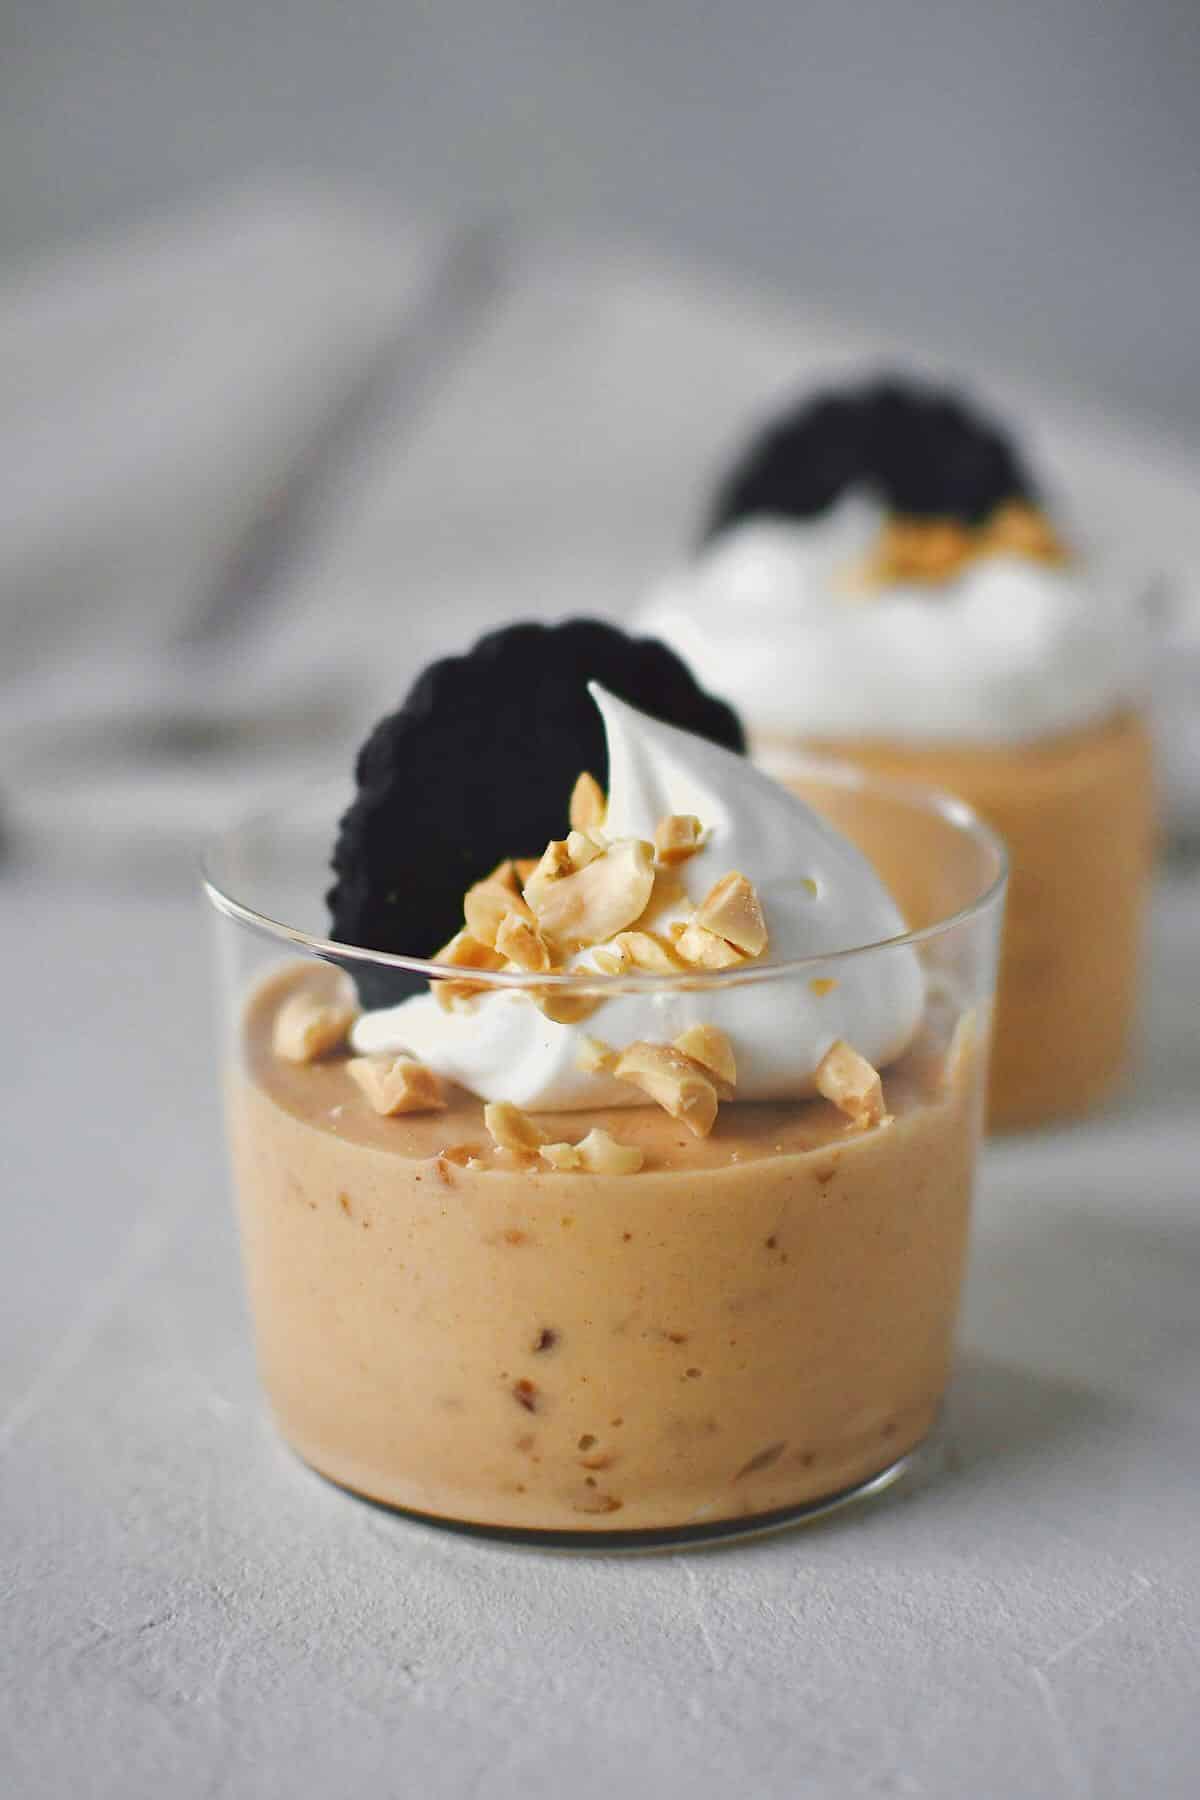 Peanut Butter Mousse in a small cup, topped with whipped cream, peanuts, and a chocolate wafer.